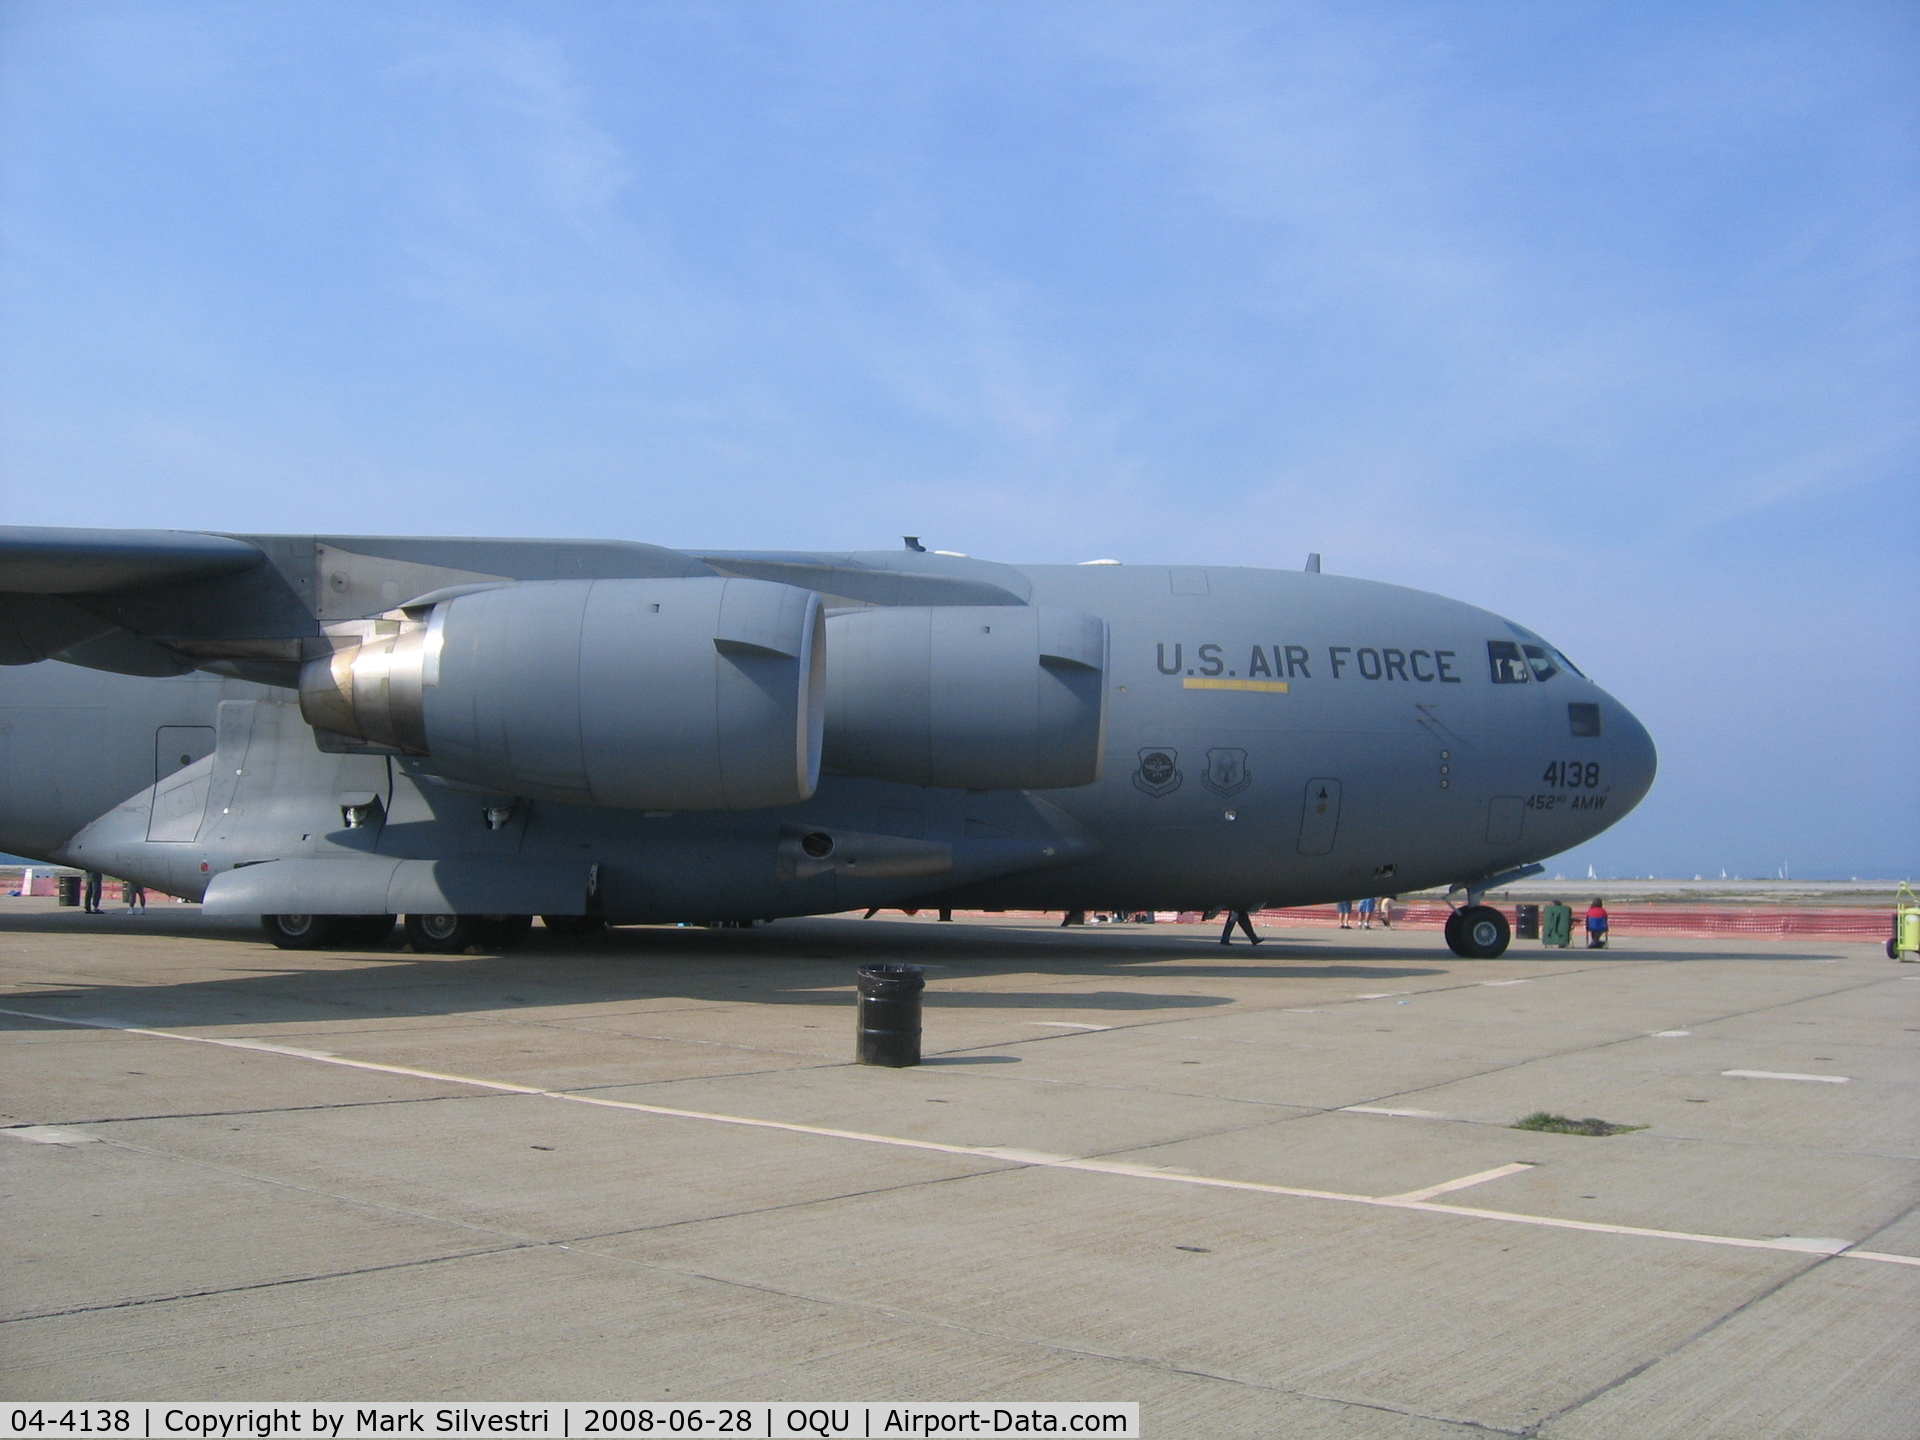 04-4138, 2004 Boeing C-17A Globemaster III C/N P-138, Quonset Point 2008